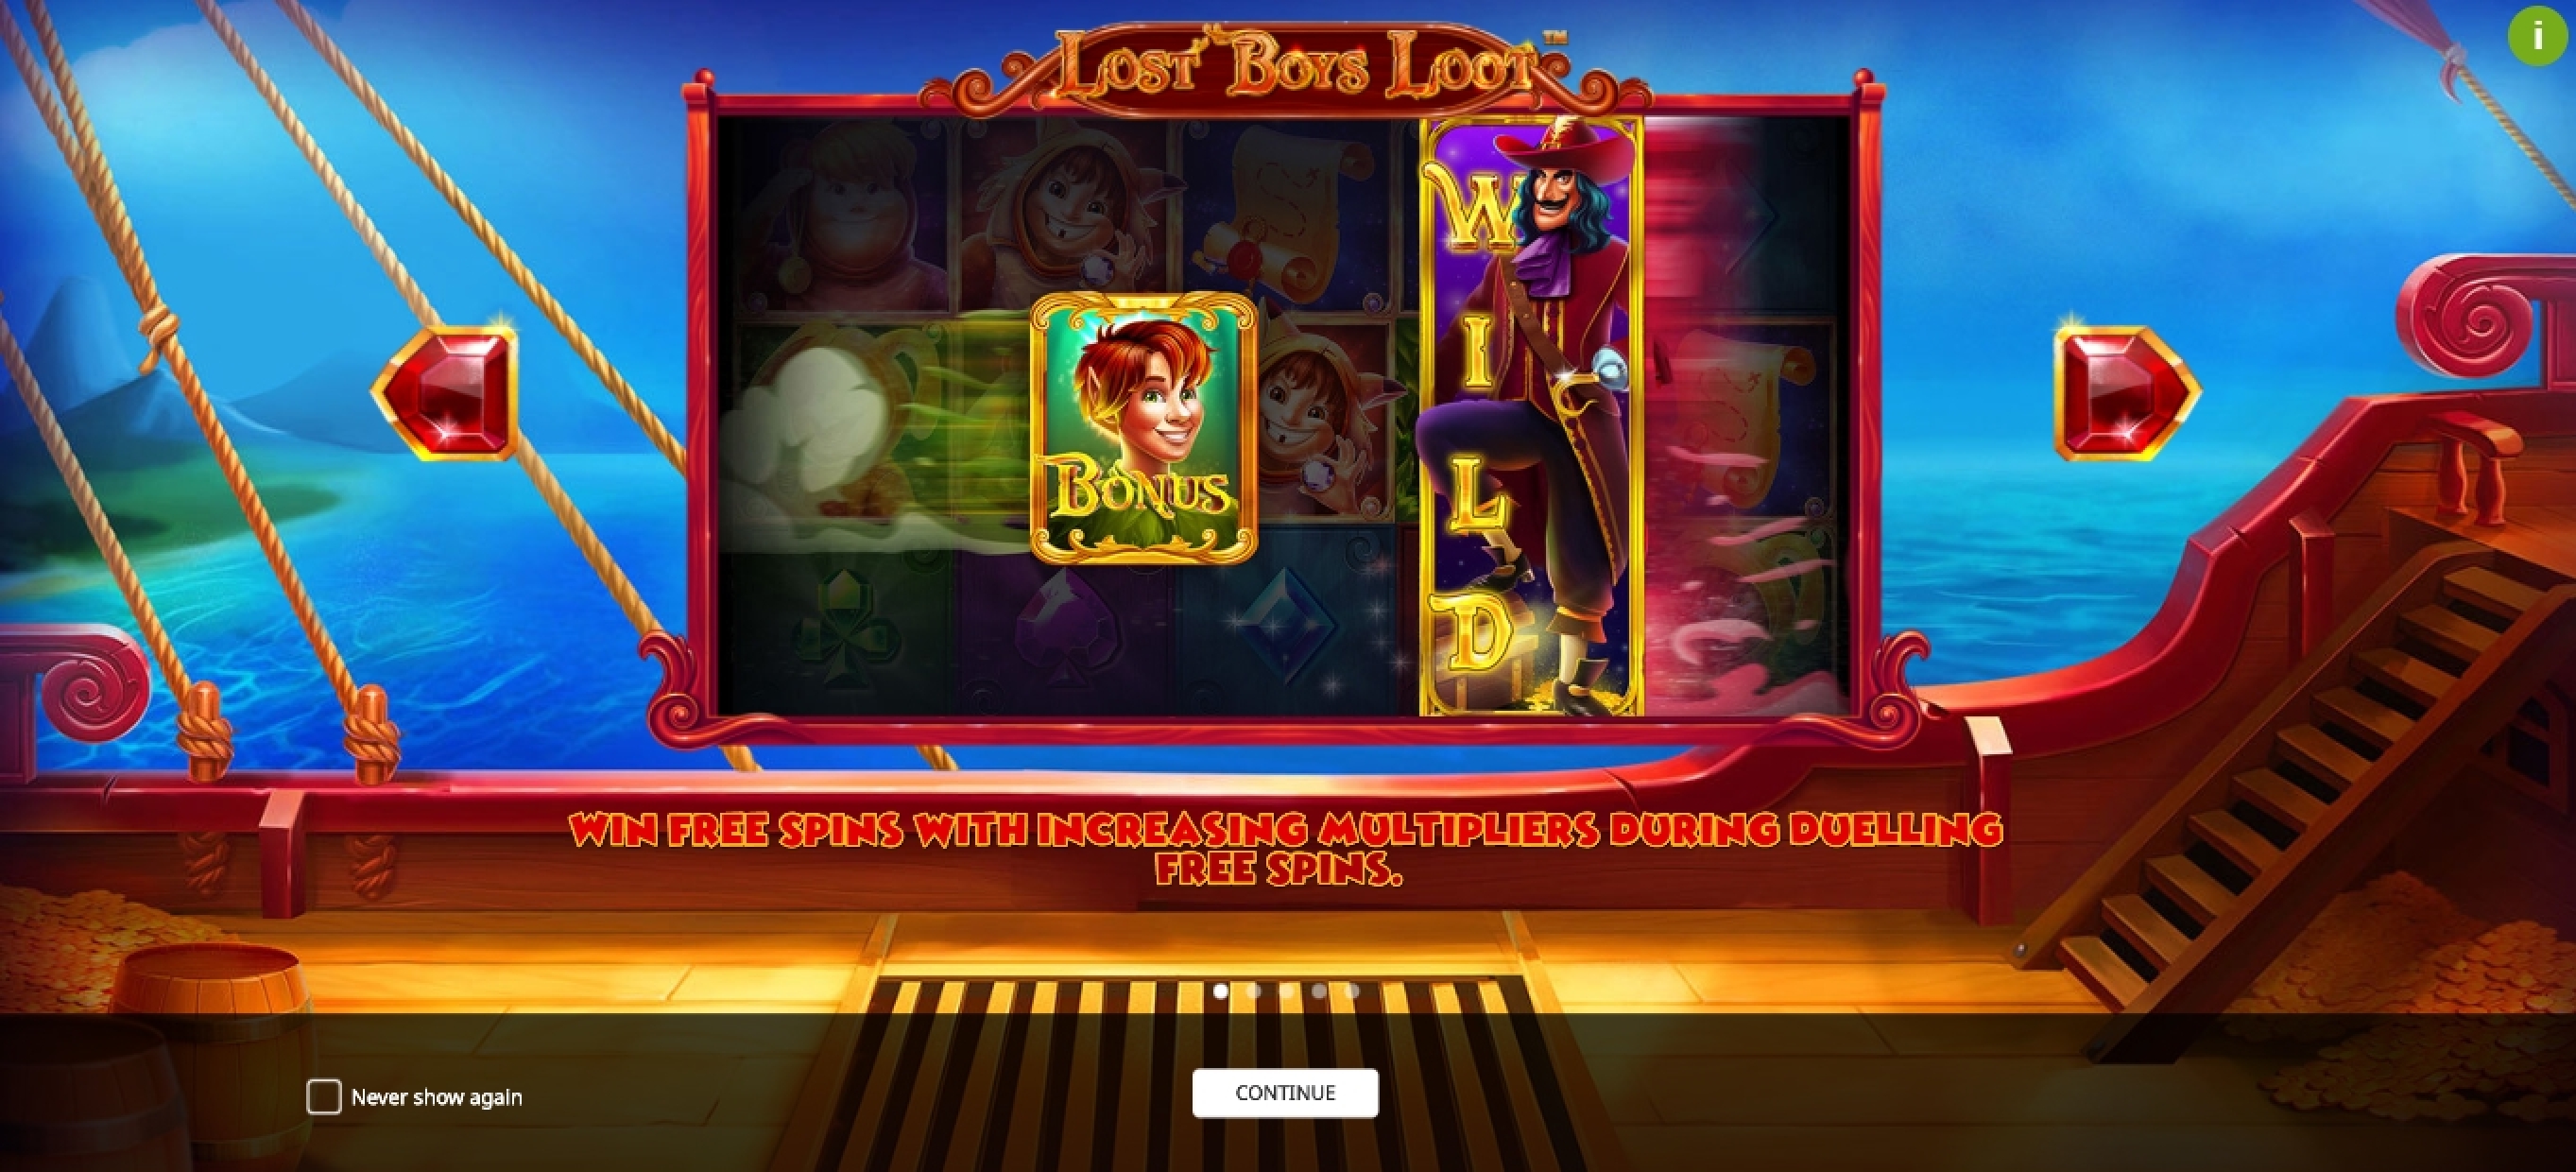 Play Lost Boys Loot Free Casino Slot Game by iSoftBet